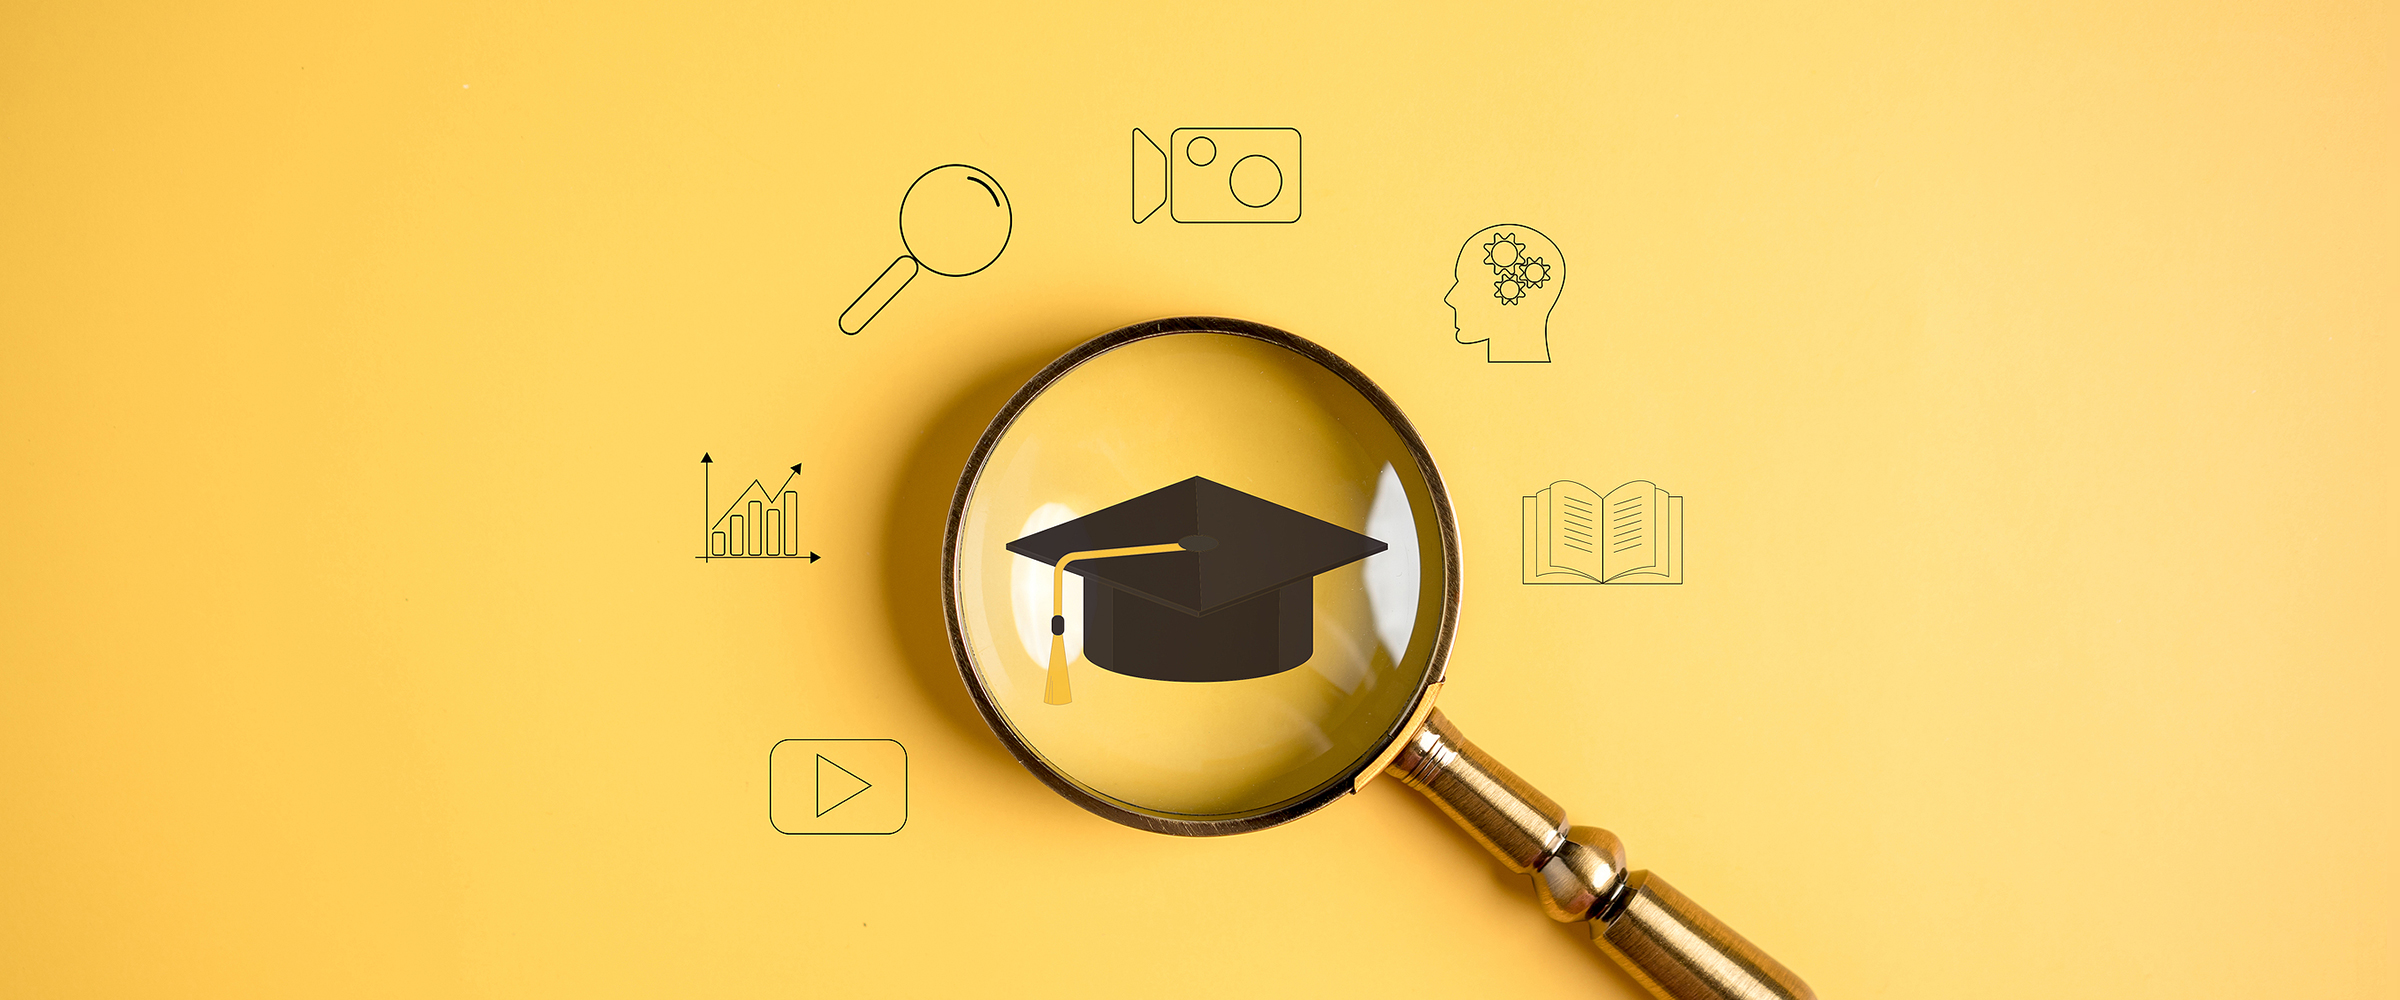 Series of tech icons and an icon of a graduation cap in the middle, magnified with a magnifying glass.